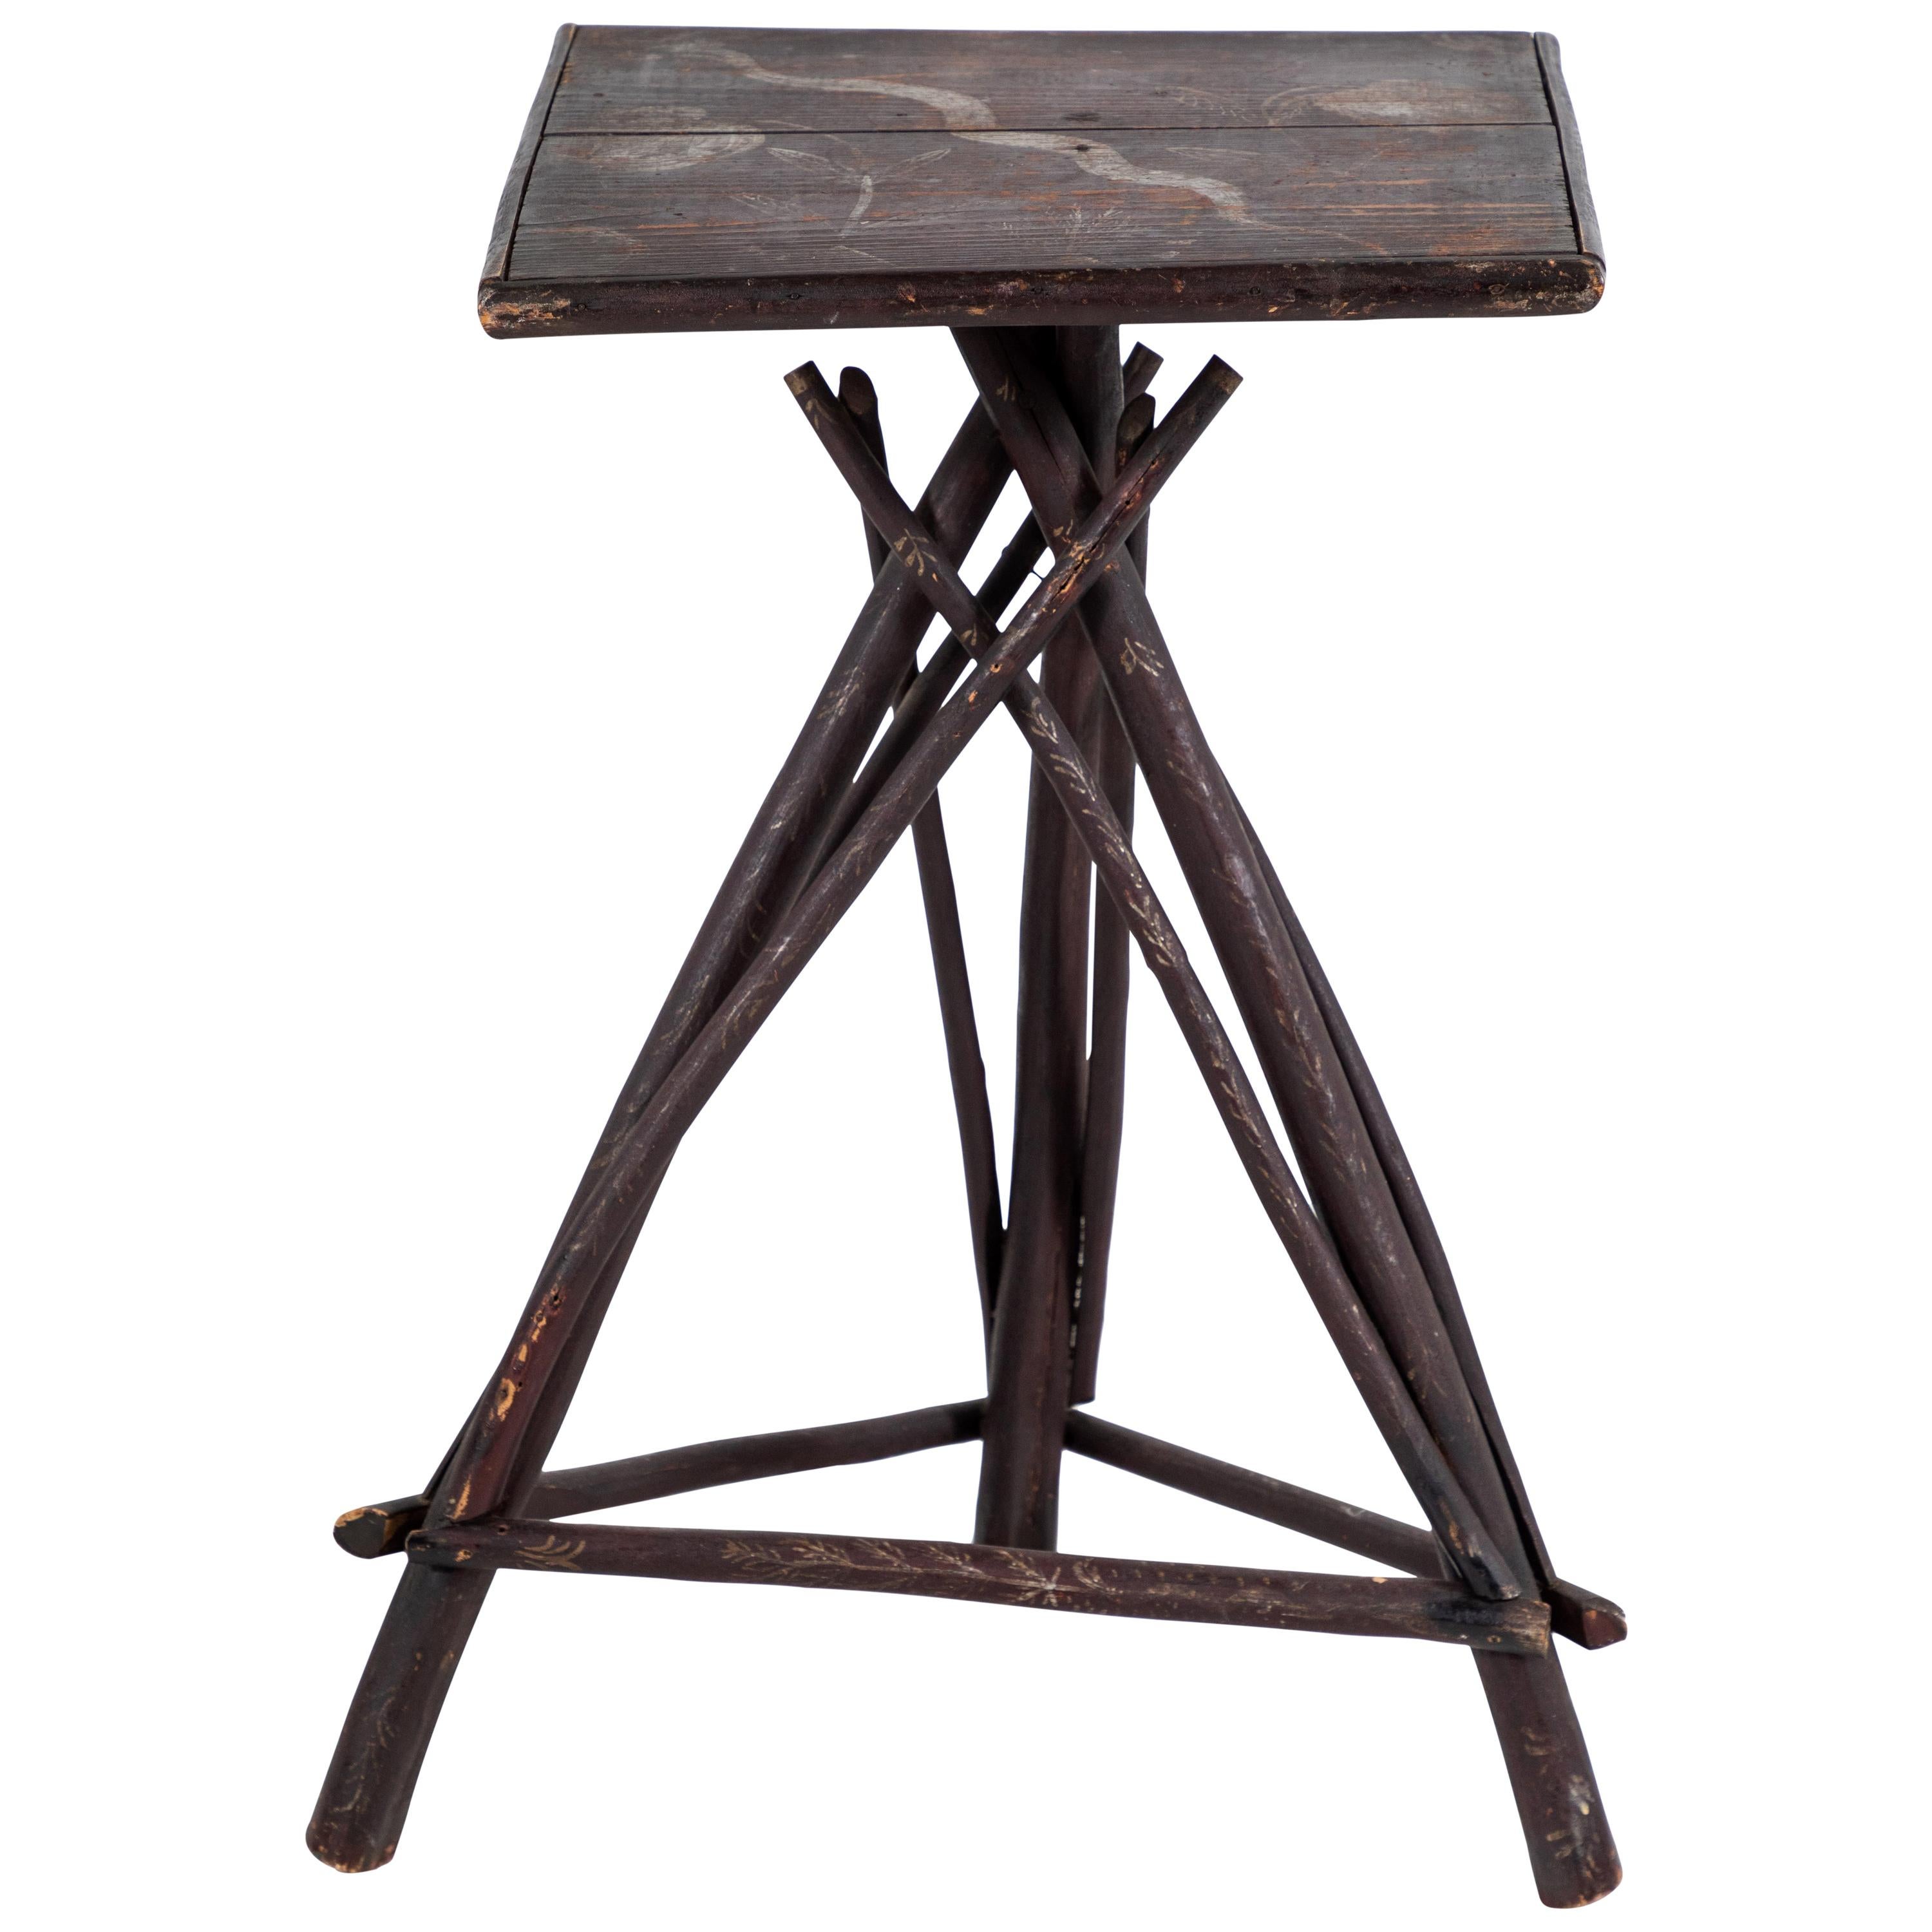 Early American Tall Table with Hand Painted Stenciled Top